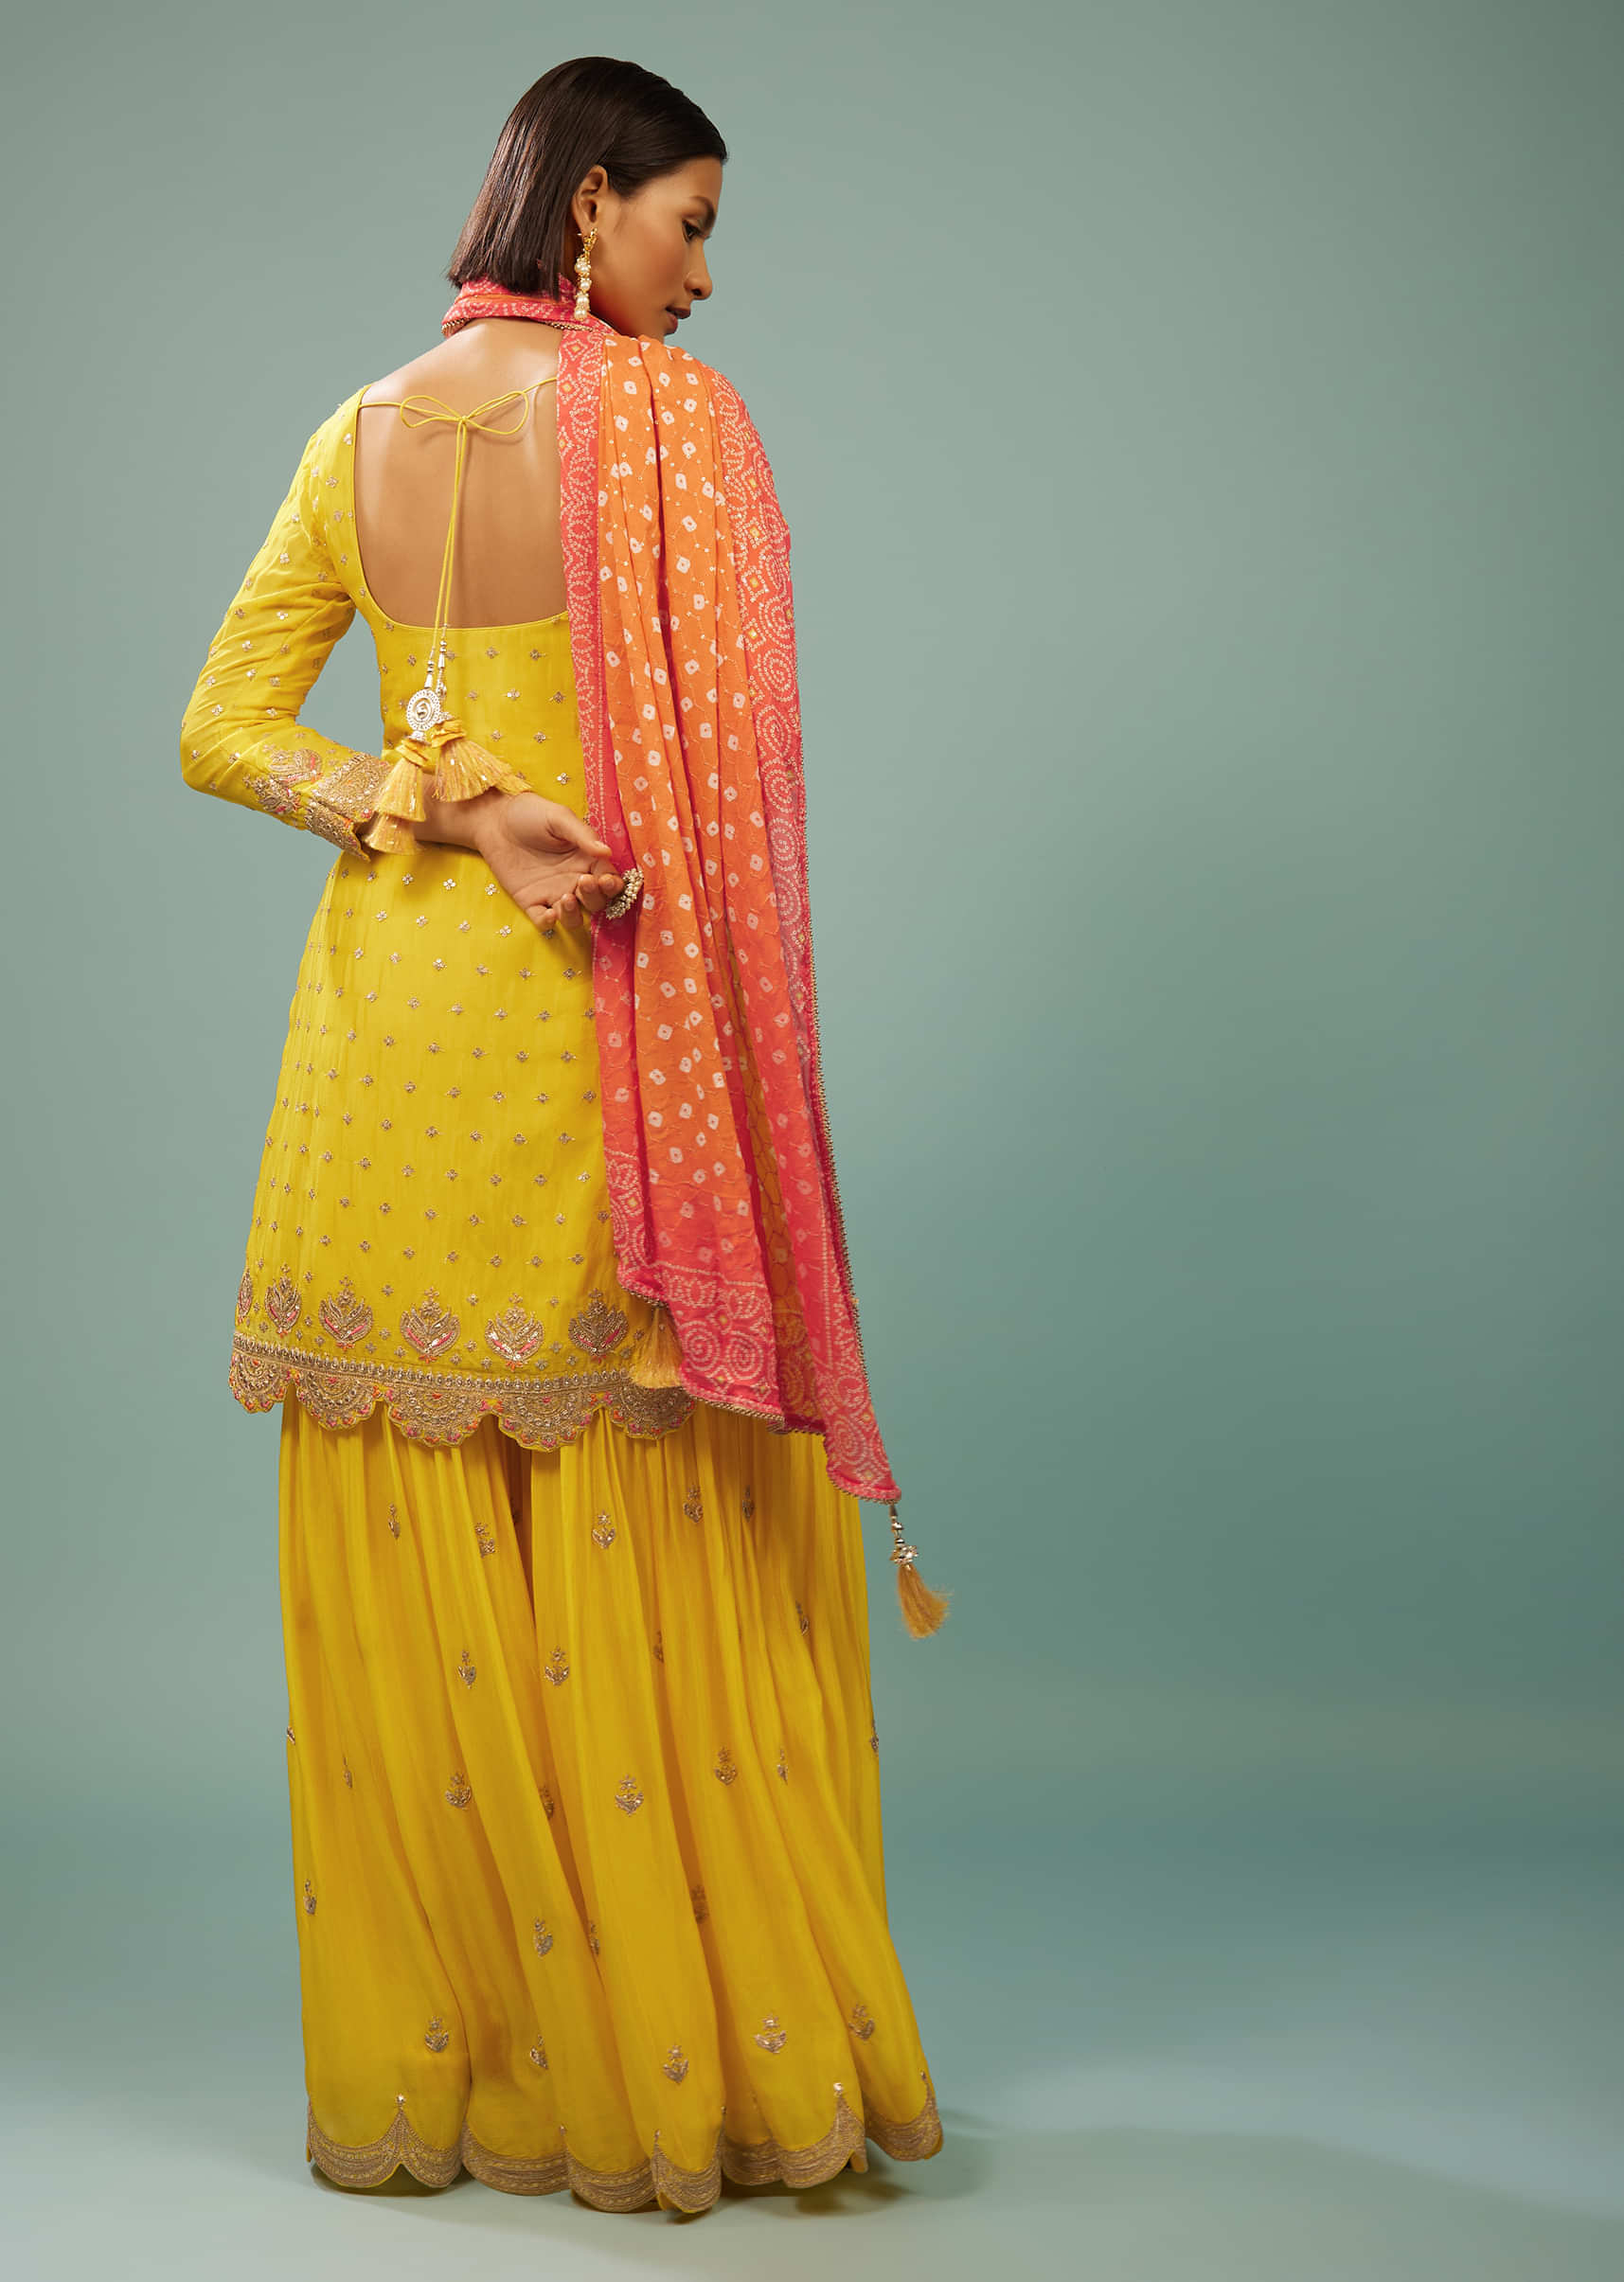 Cyber Yellow Sharara Suit With Embroidery And Bandhani Dupatta